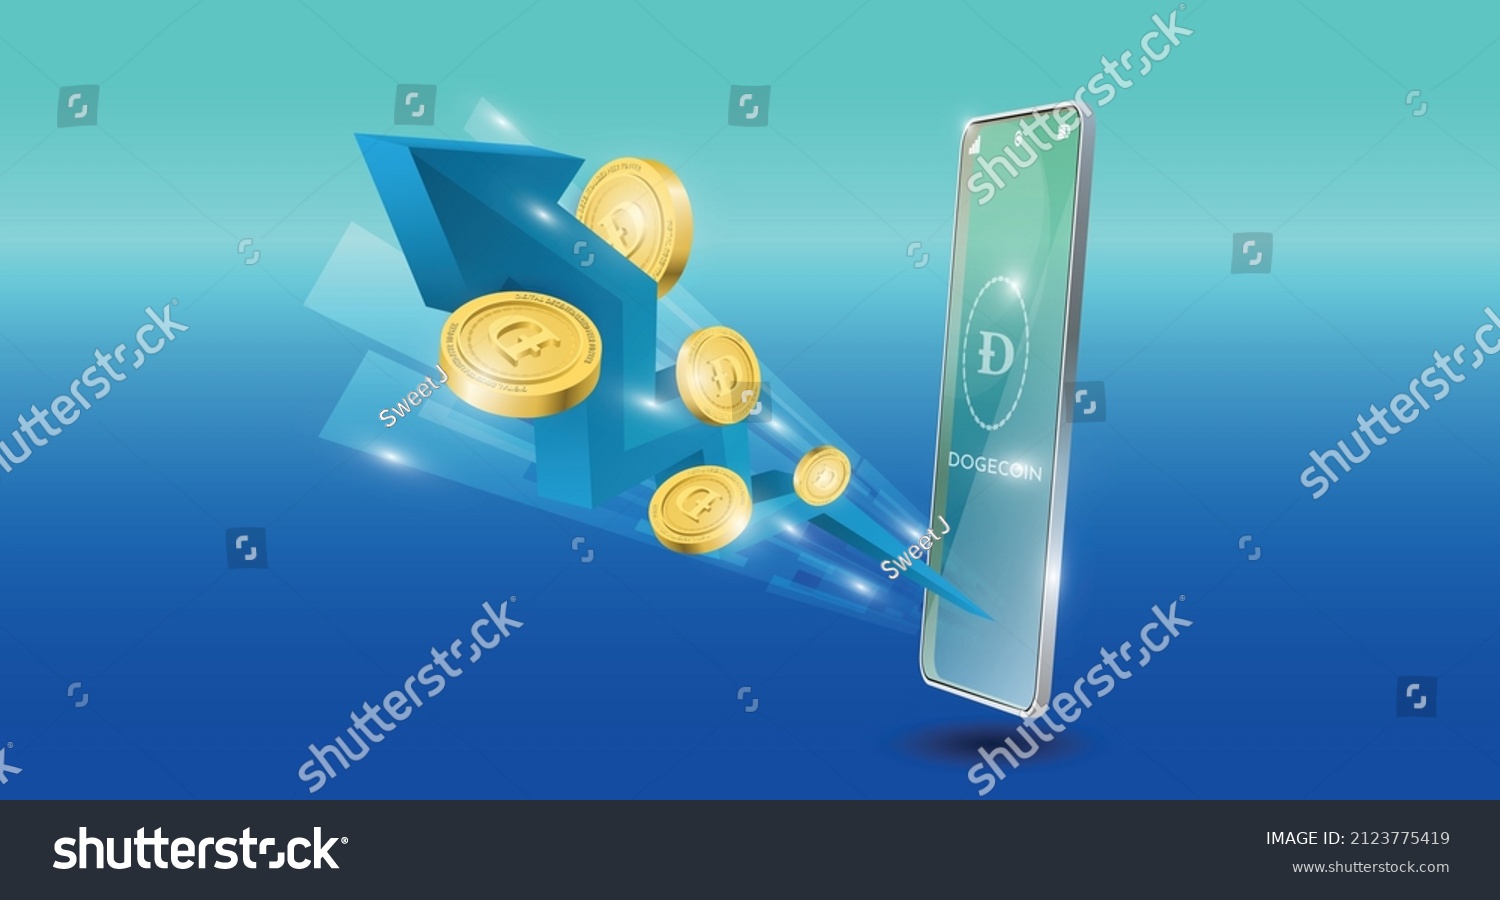 SVG of blockchain technology concept with uptrend blue arrow with dogecoin background. Realistic vector illustration. svg